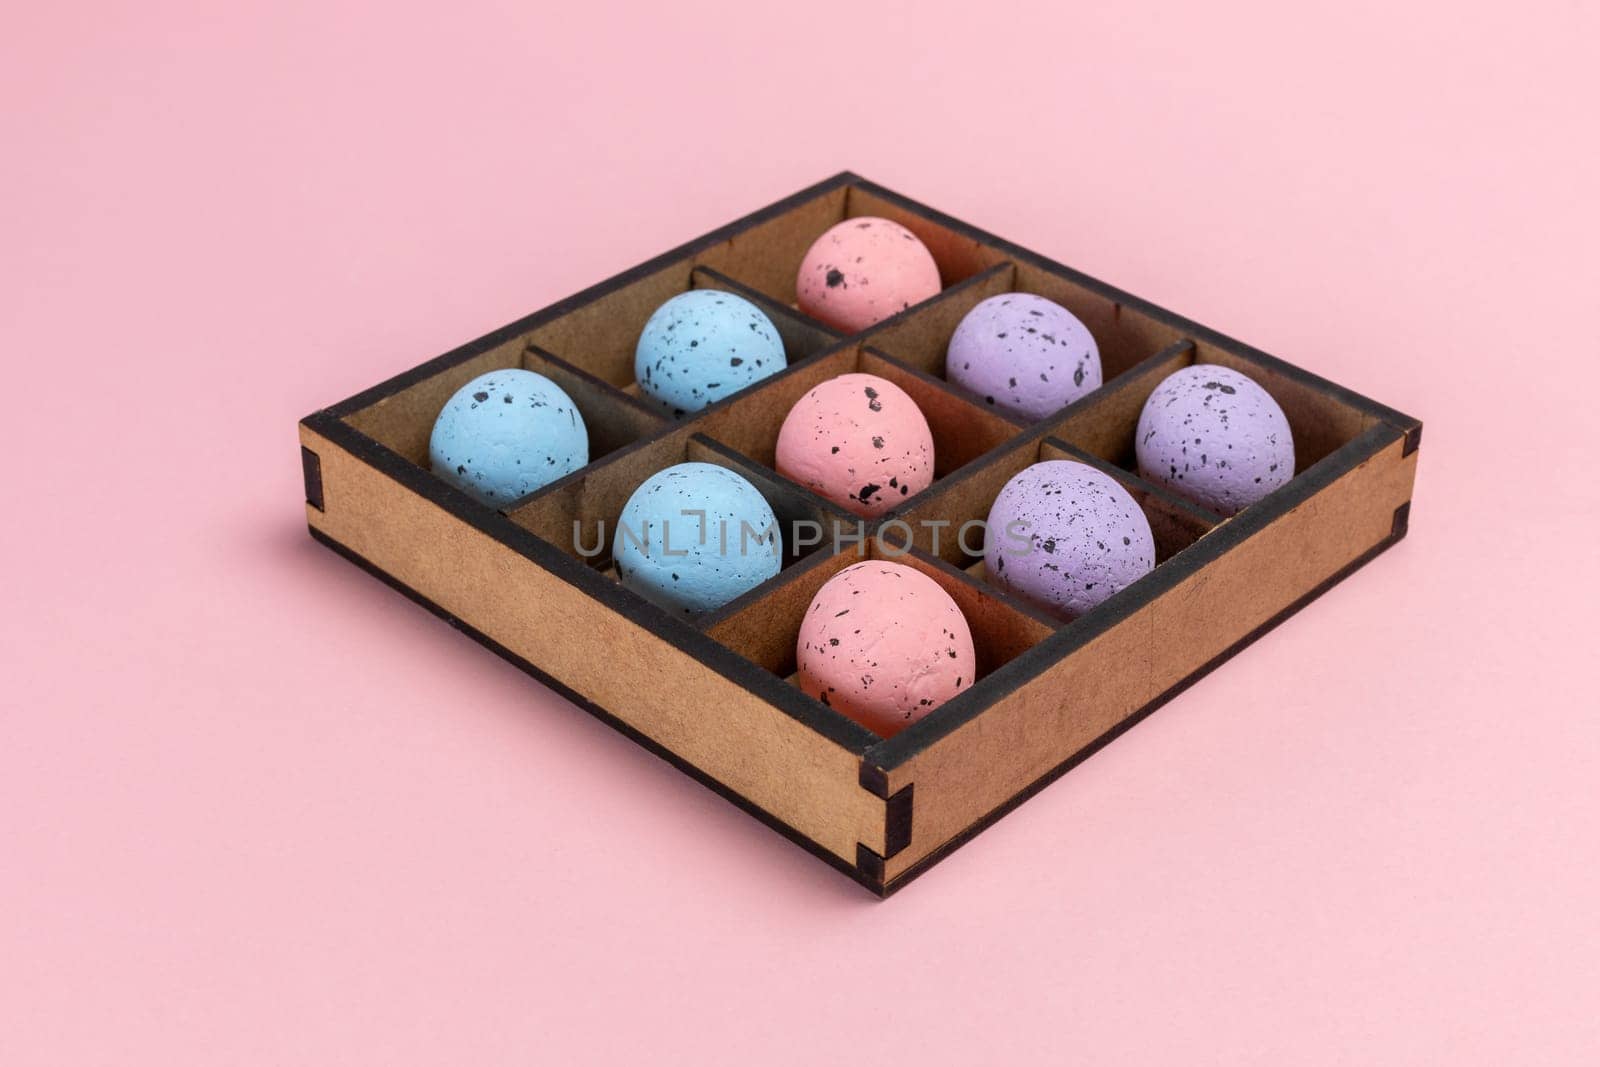 Colorful Easter eggs in a wooden box on the pink background.